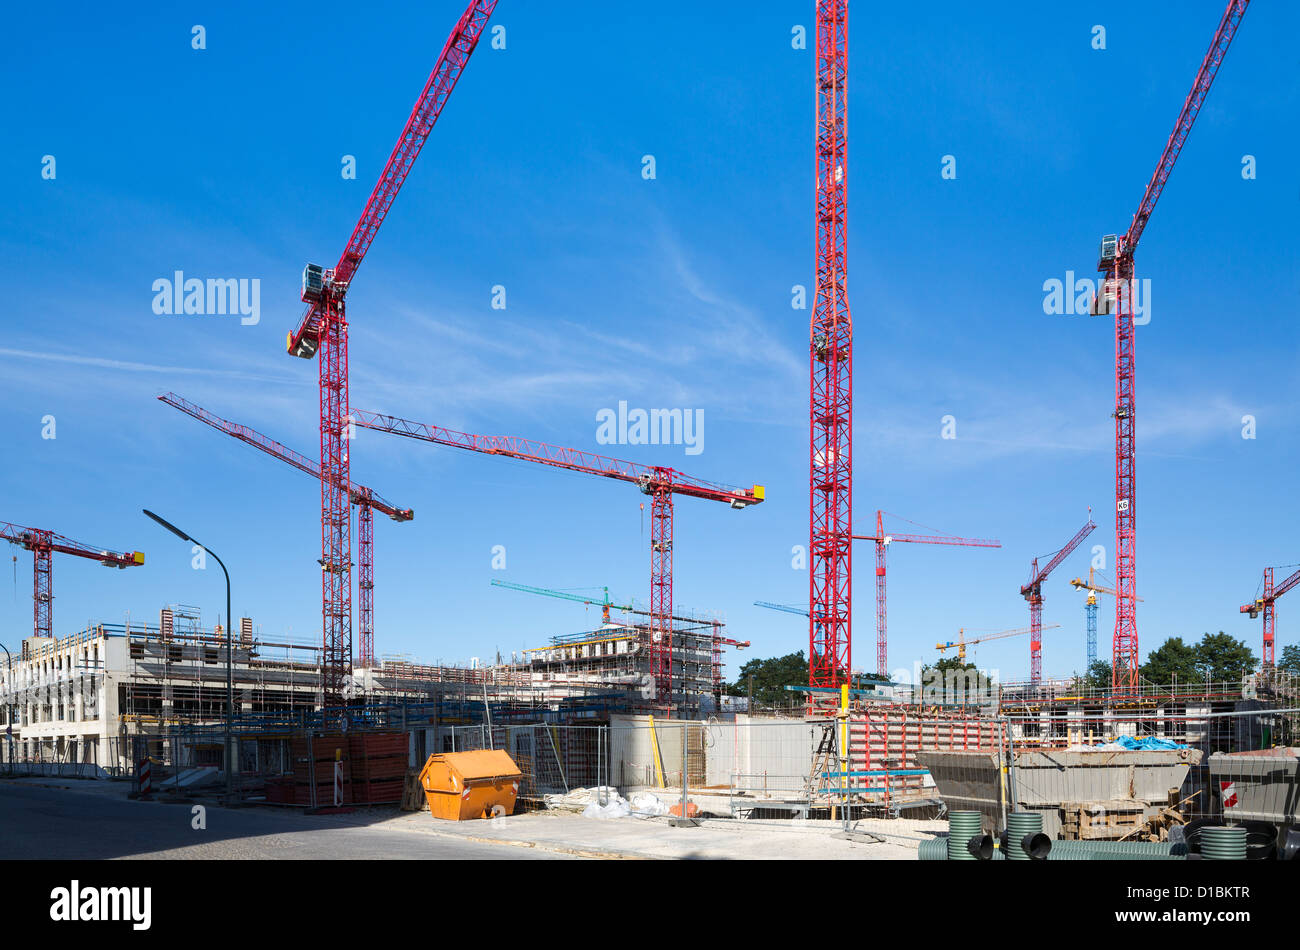 Cranes on a construction site Stock Photo